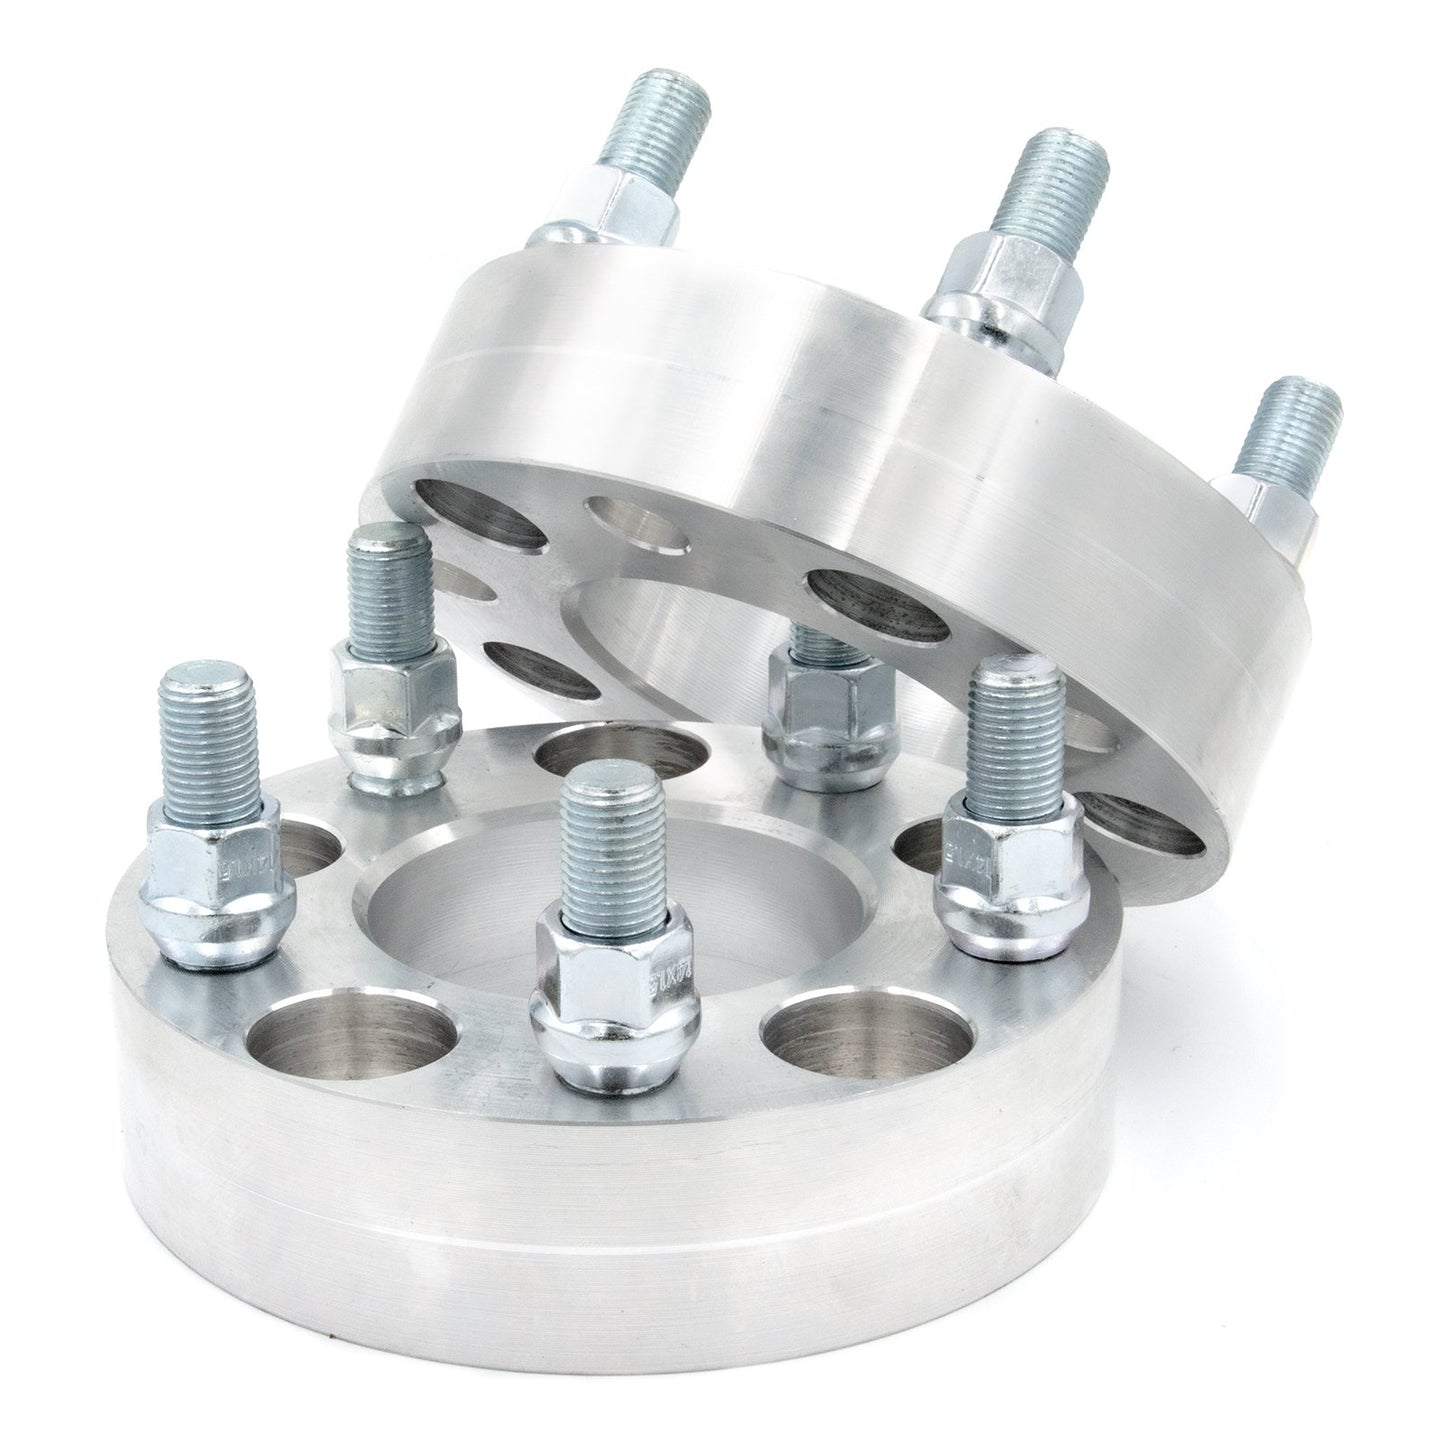 5x130 to 5x150 Wheel Spacer/Adapter - Thickness: 3/4"- 4"